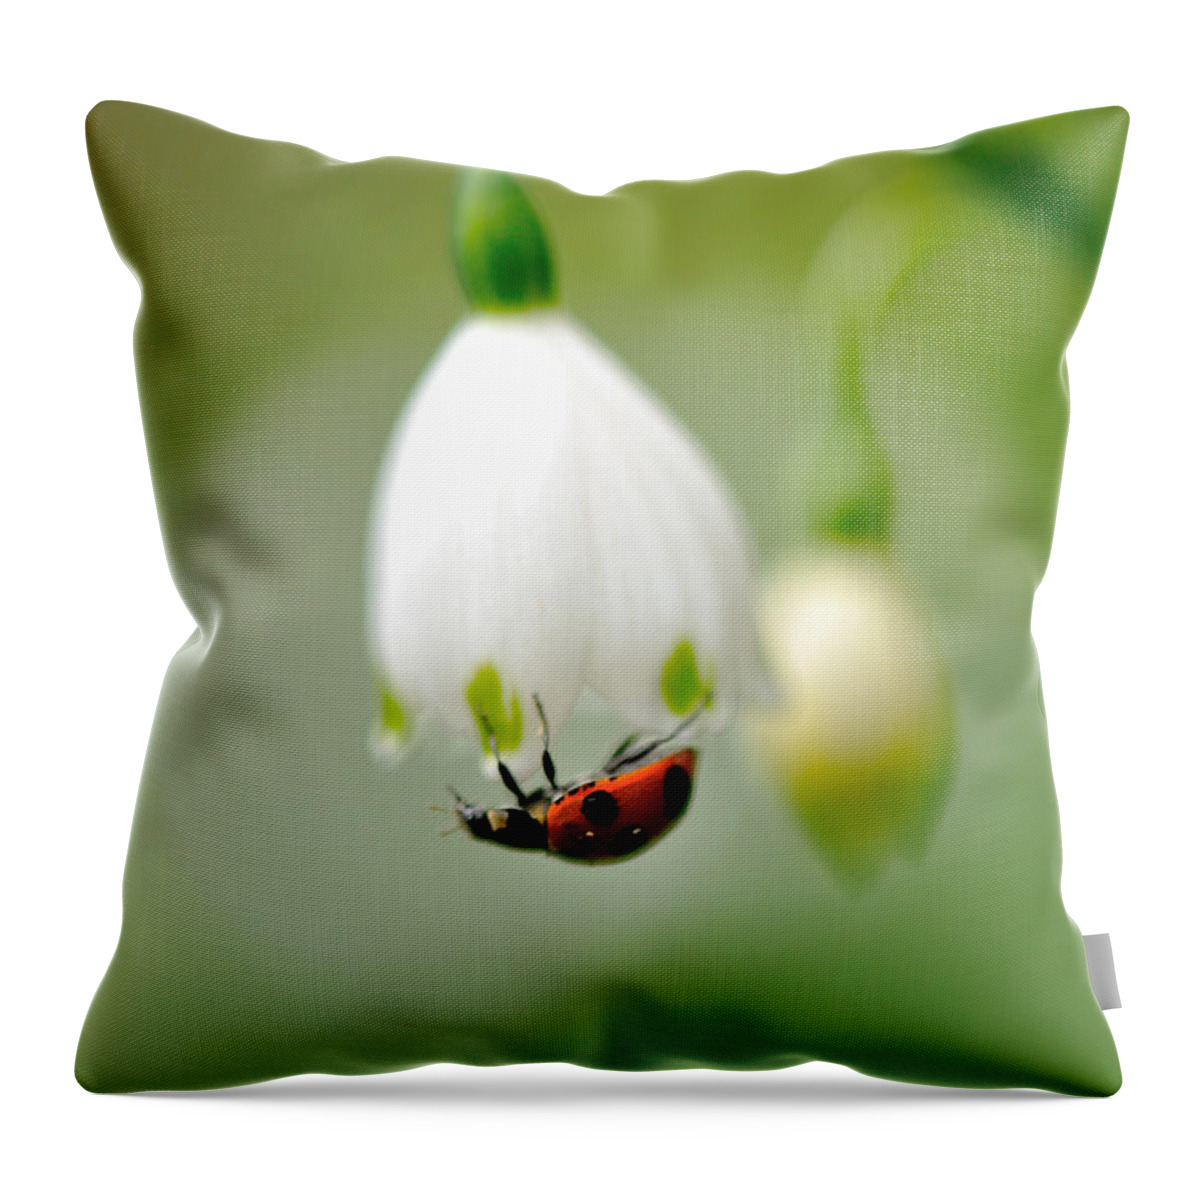 Hanging Throw Pillow featuring the photograph Snowflake With Ladybug by Myu-myu